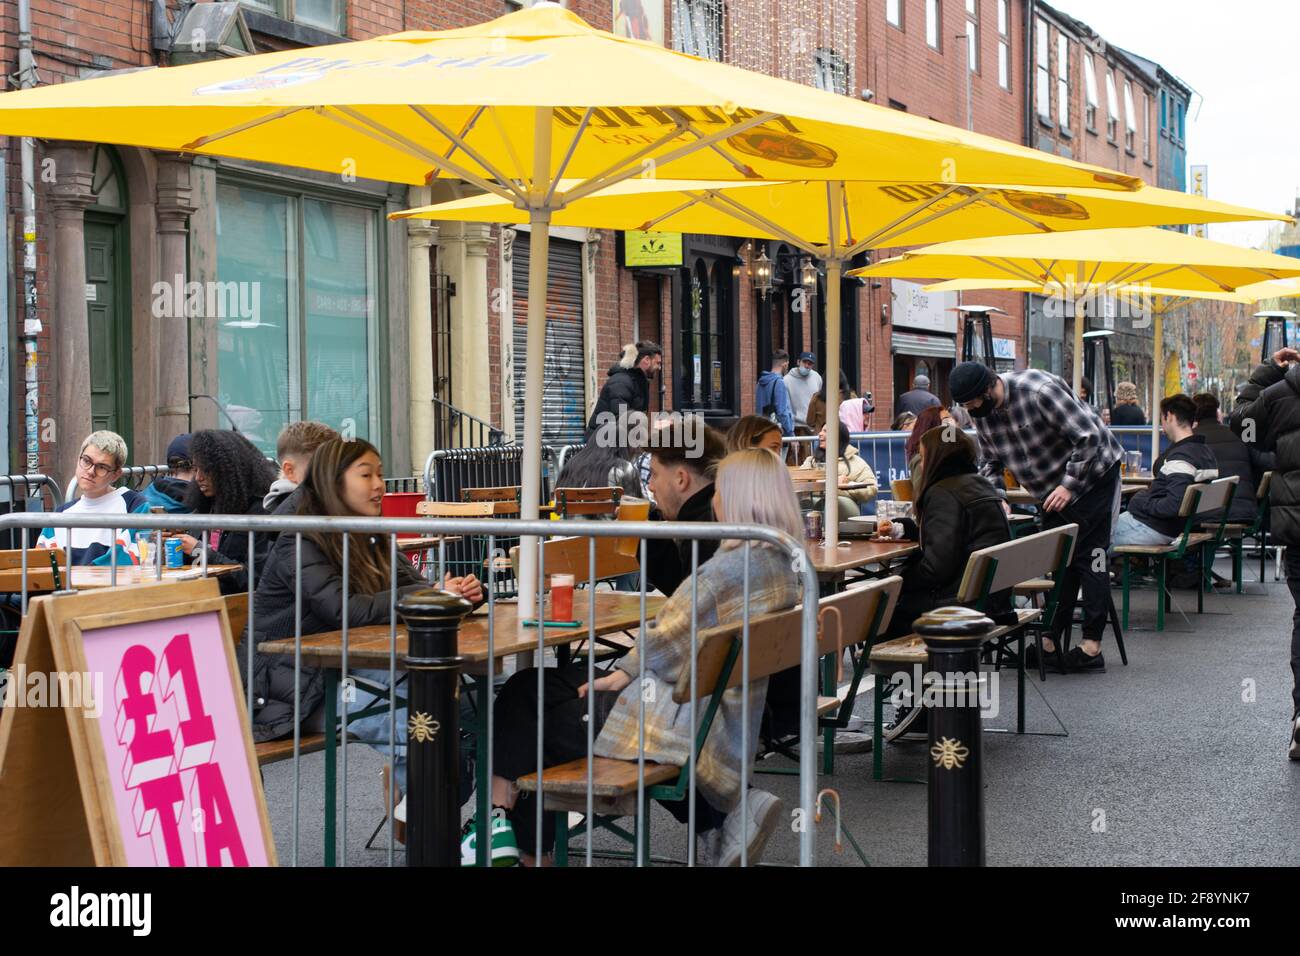 Pavement dining after easing of lockdown restrictions in England, Northern Quarter, Manchester, UK Stock Photo